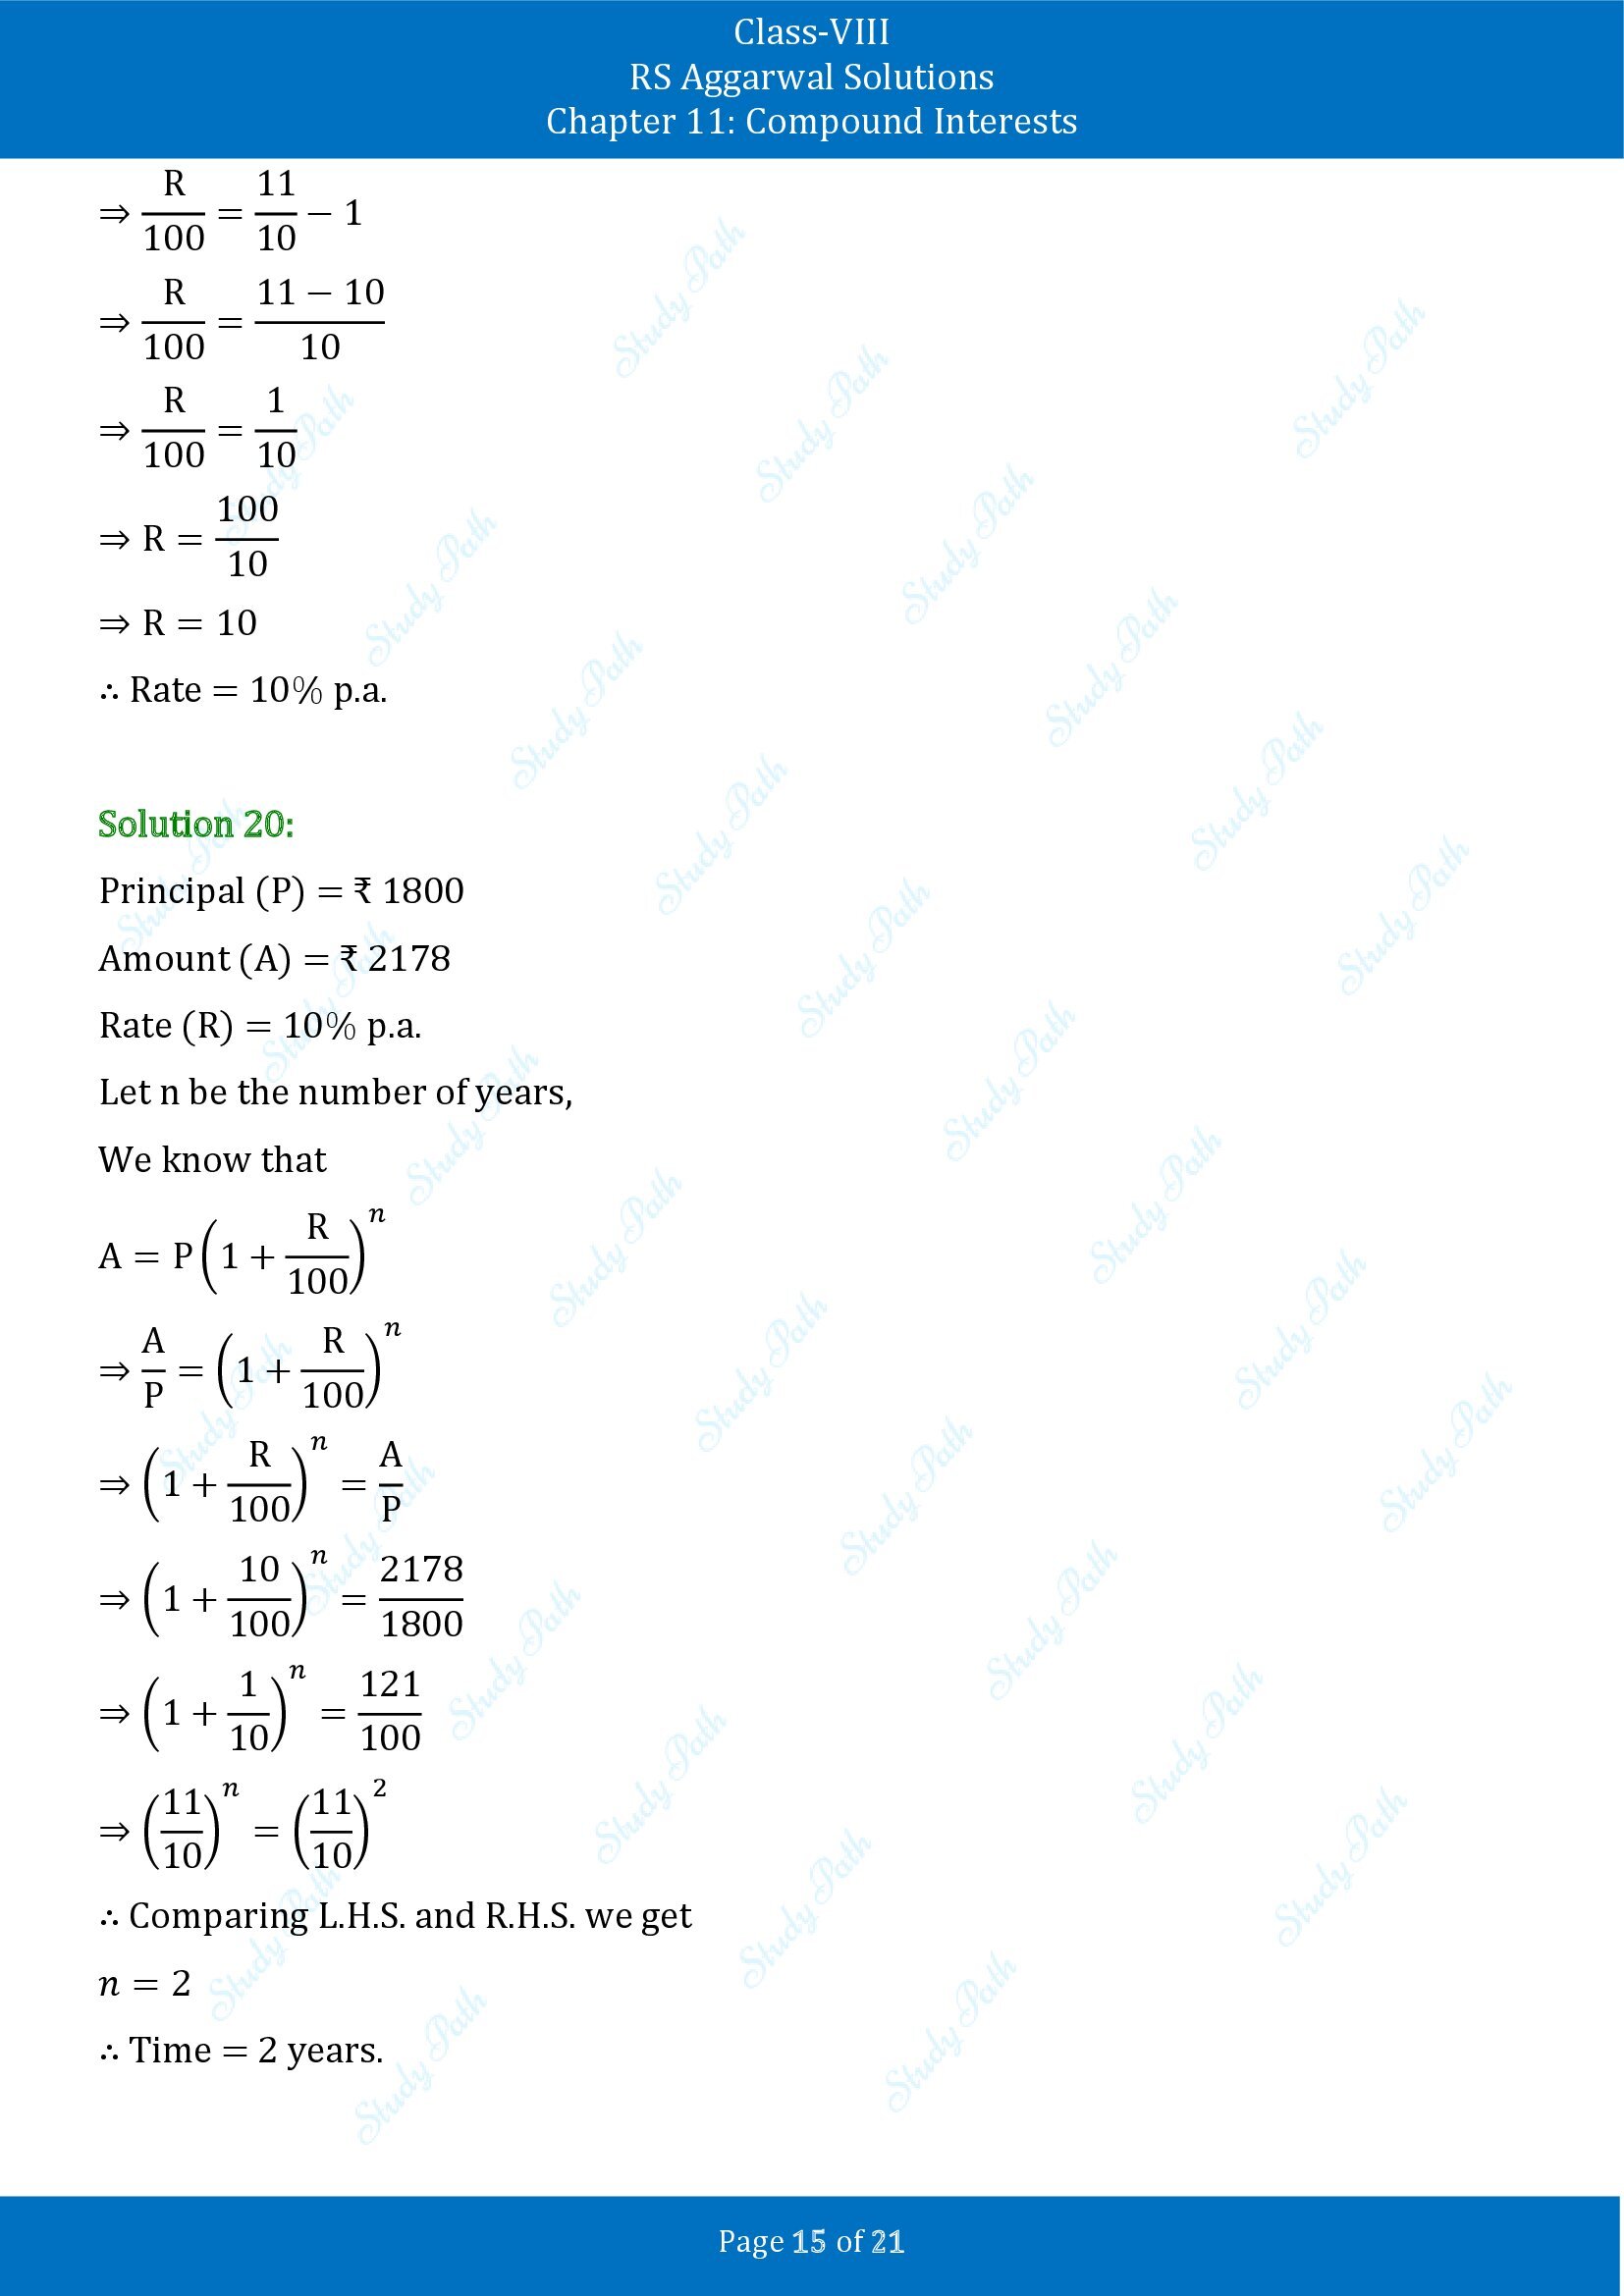 RS Aggarwal Solutions Class 8 Chapter 11 Compound Interests Exercise 11B 00015